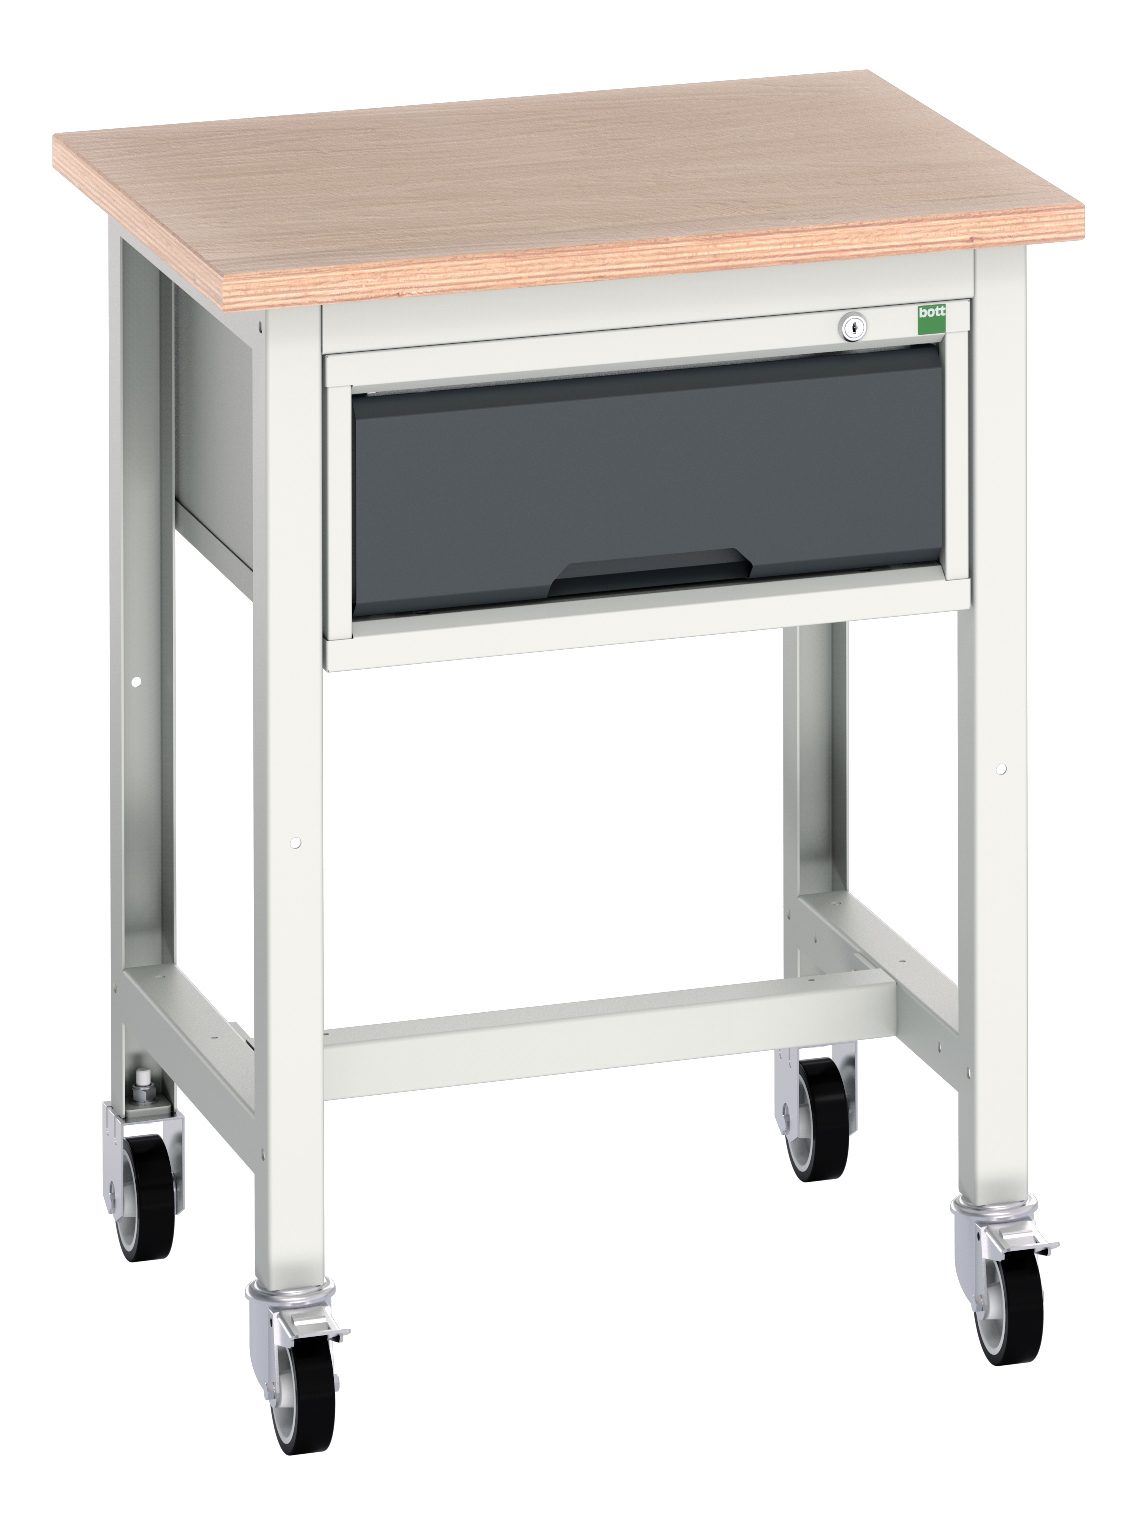 Bott Verso Mobile Workstand With 1 Drawer Cabinet - 16922200.19